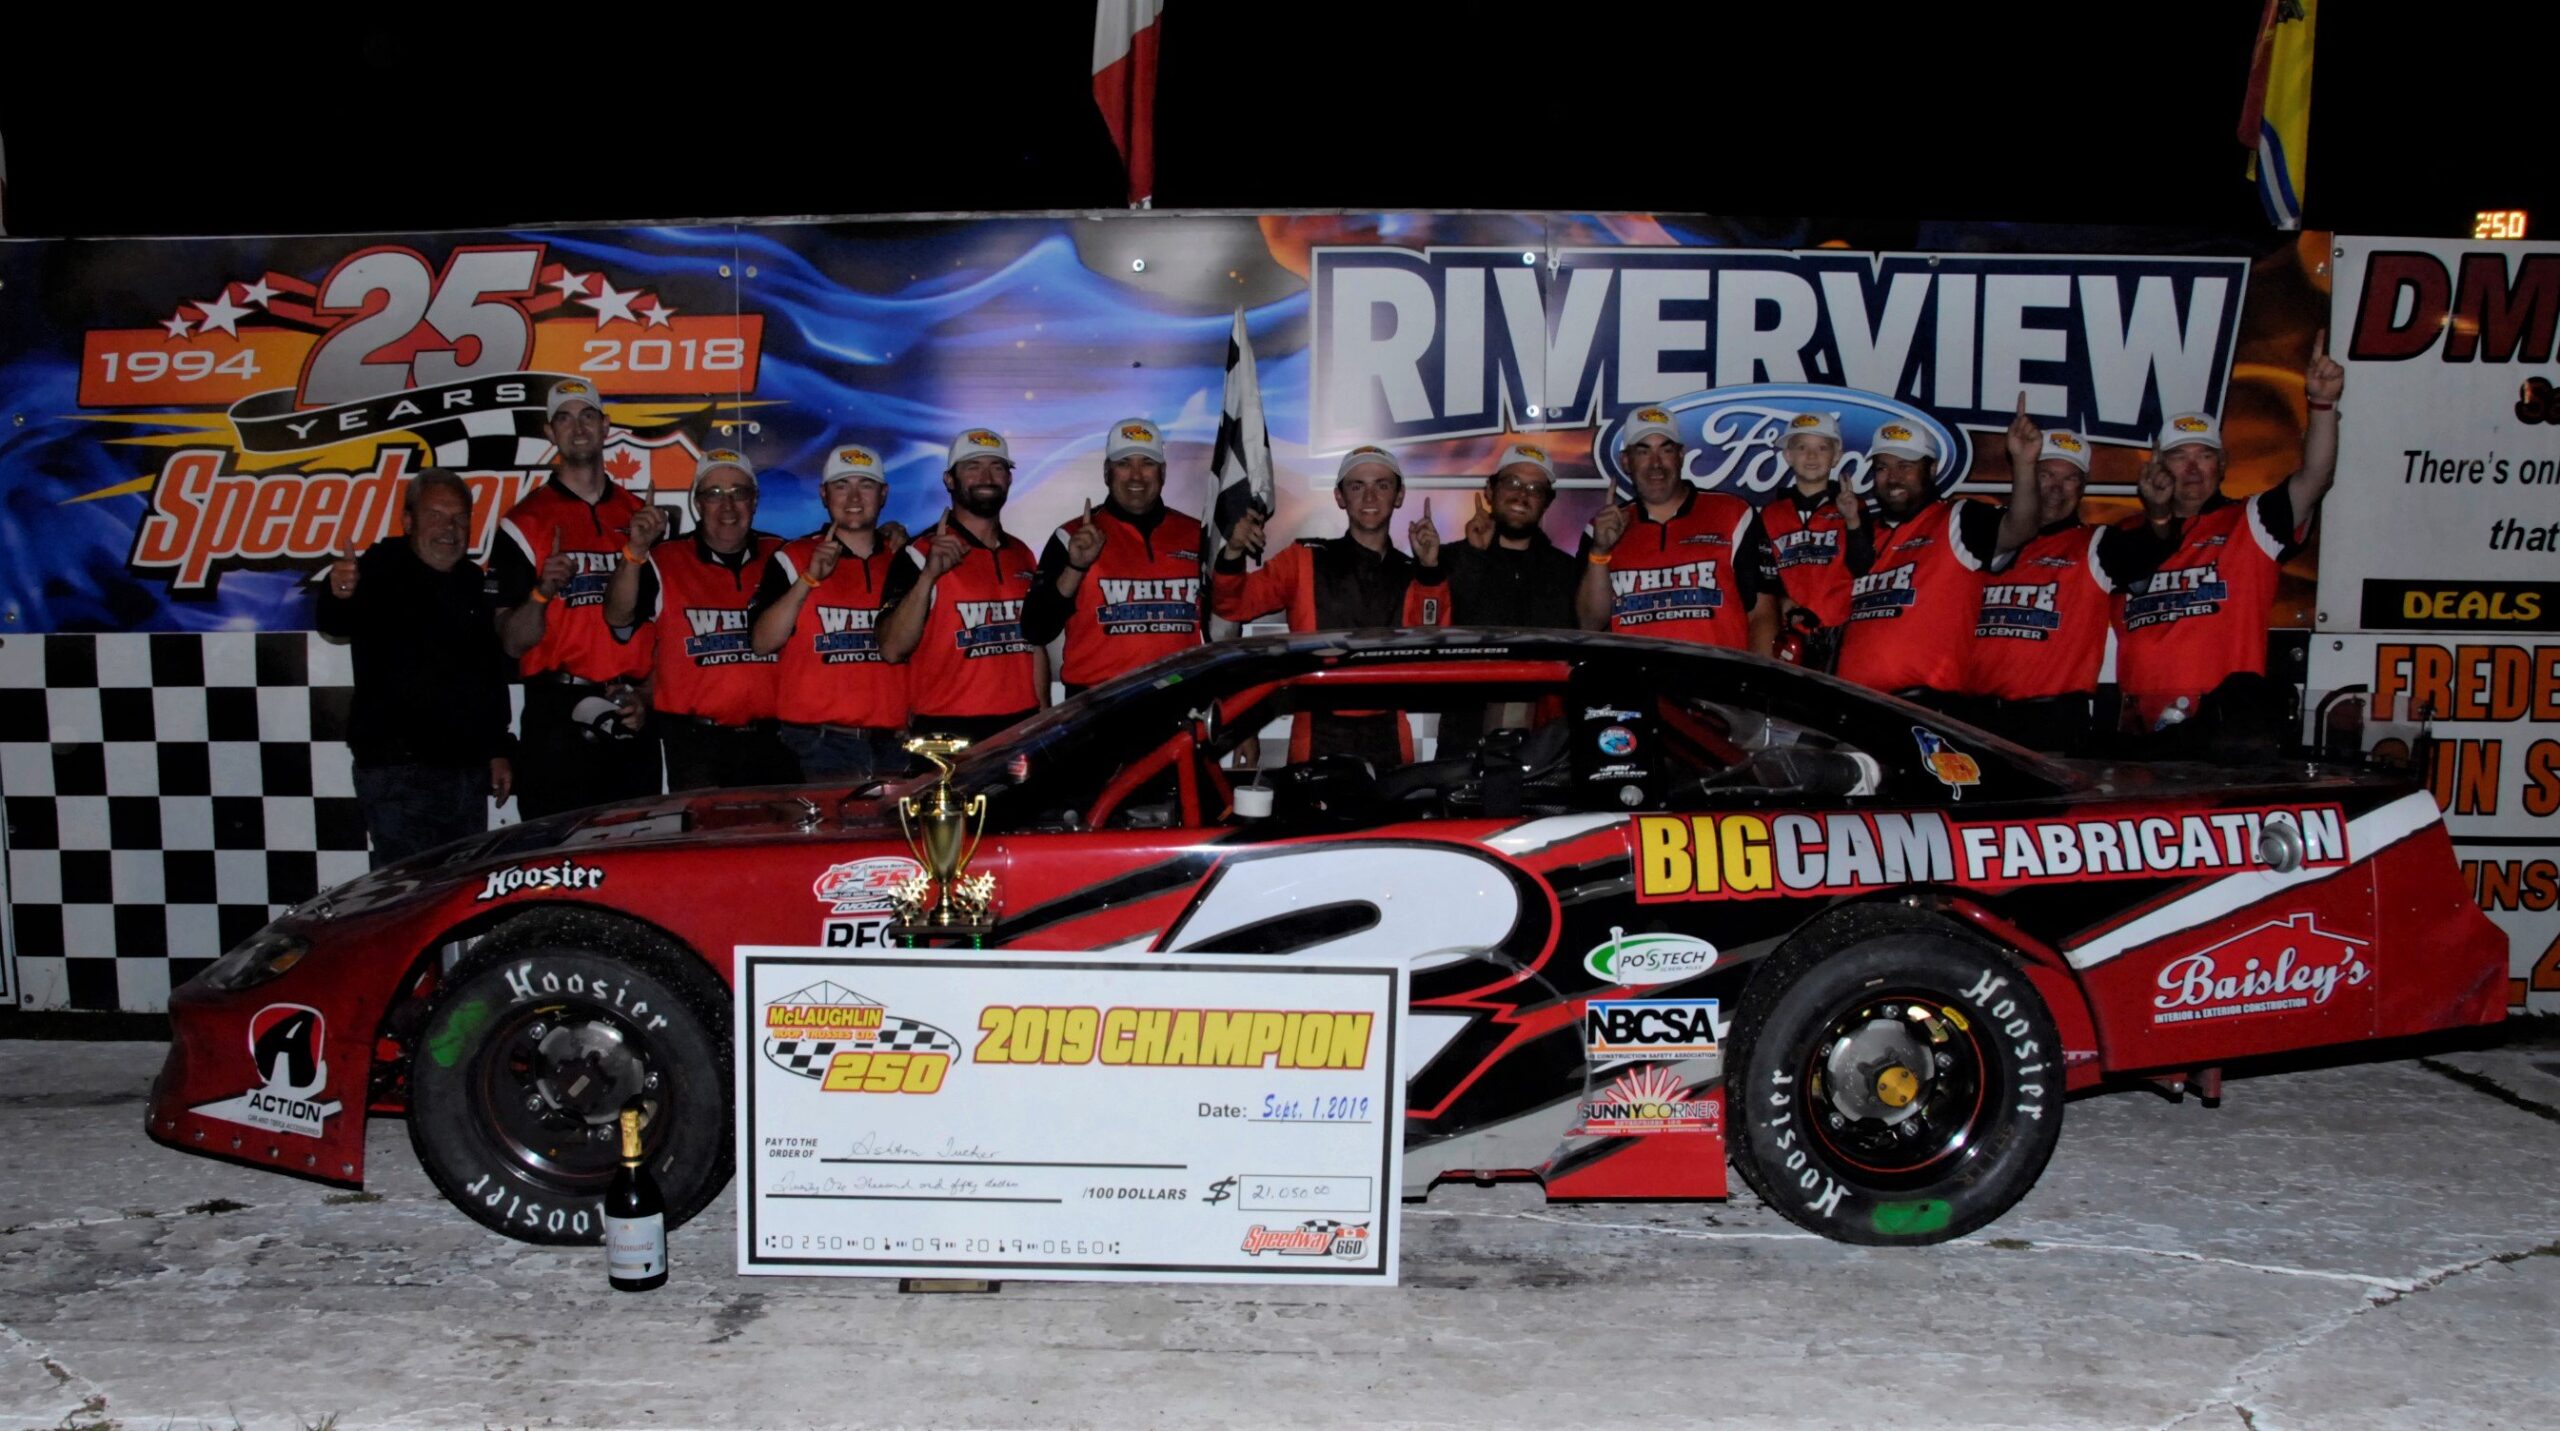 TUCKER TRIUMPHS FOR FIRST MCLAUGHLIN ROOF TRUSSES 250 WIN